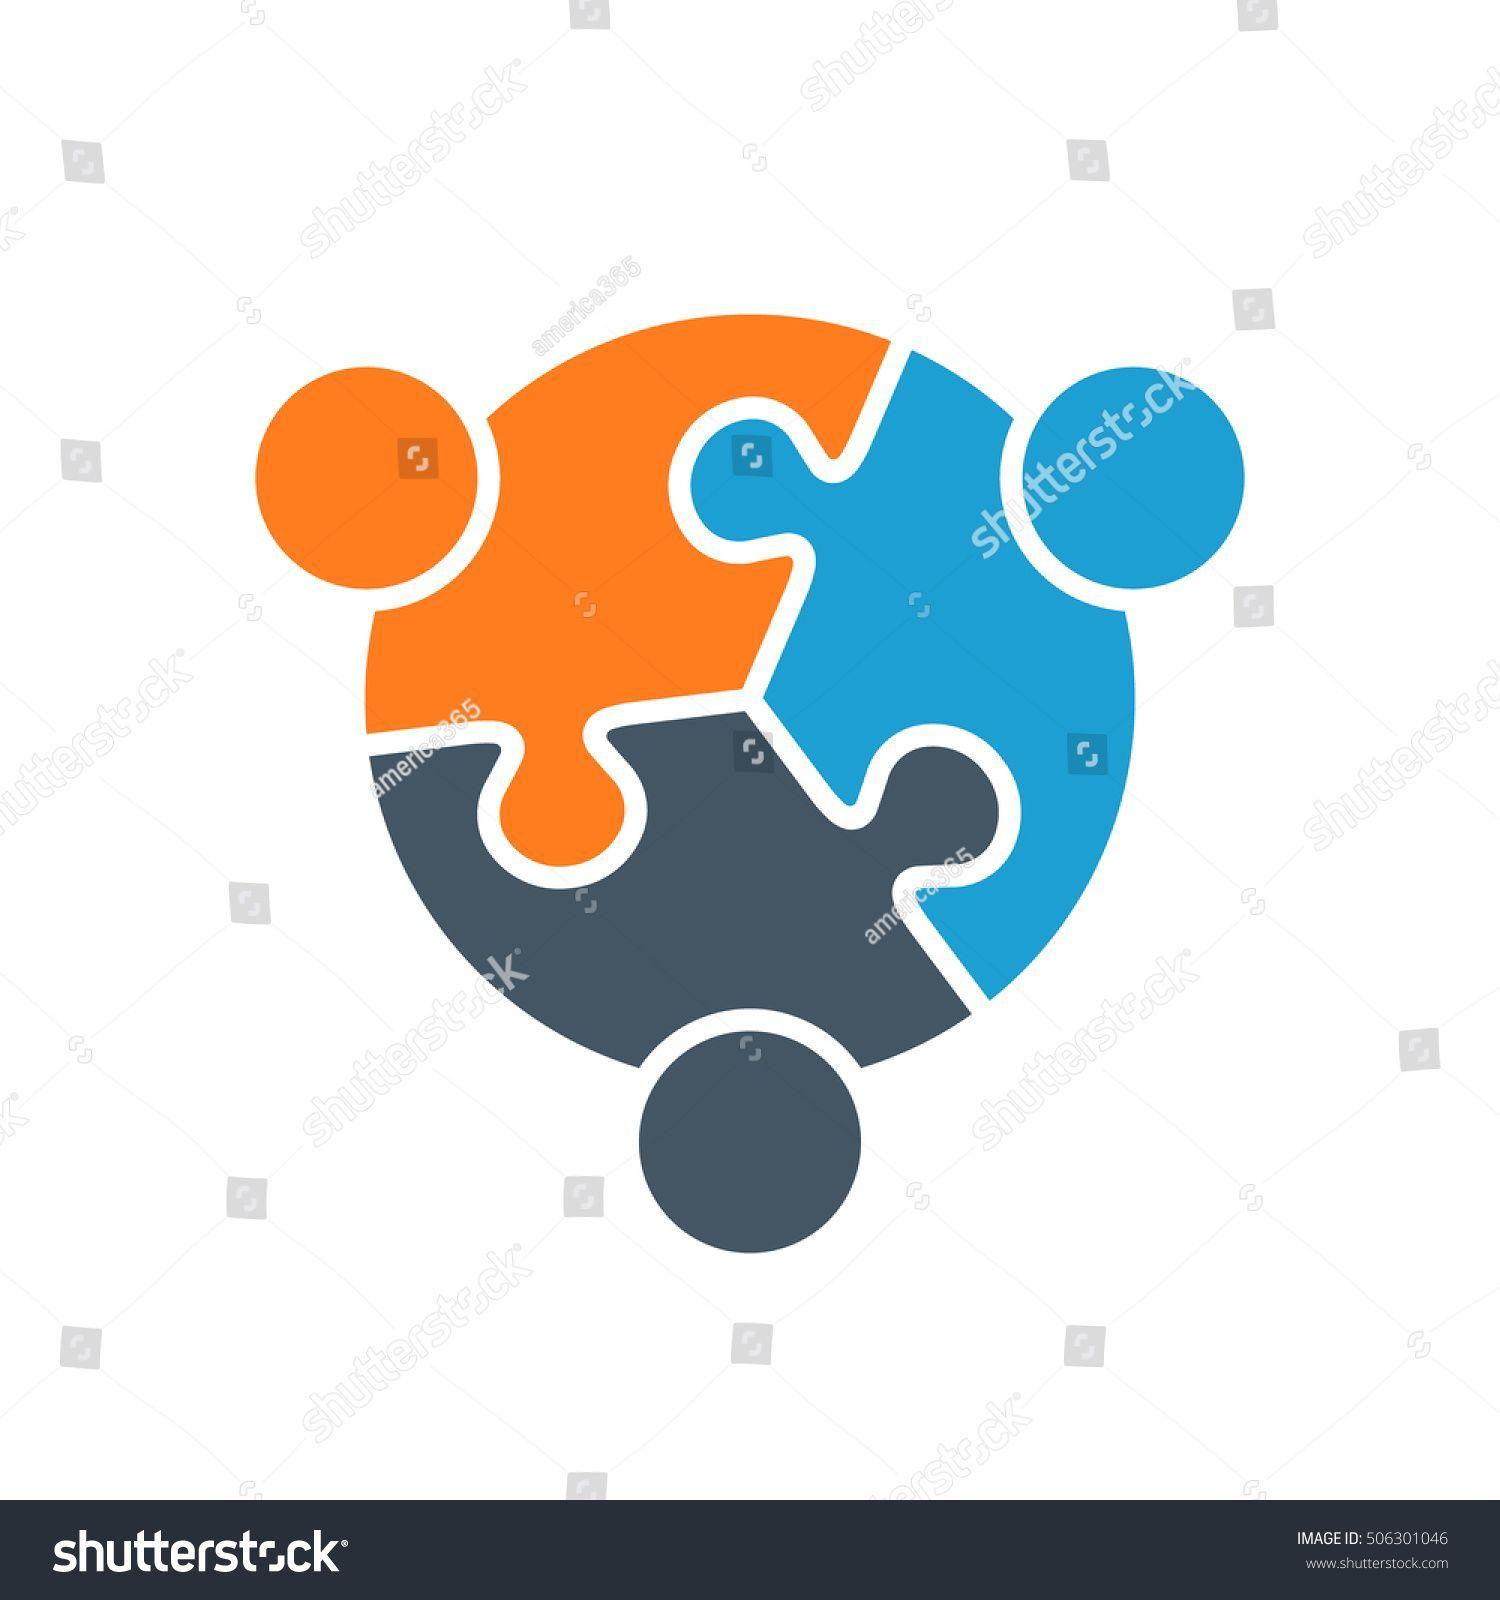 3 Person Logo - Vector Puzzle Family of 3 #team #people #business #teamwork #group